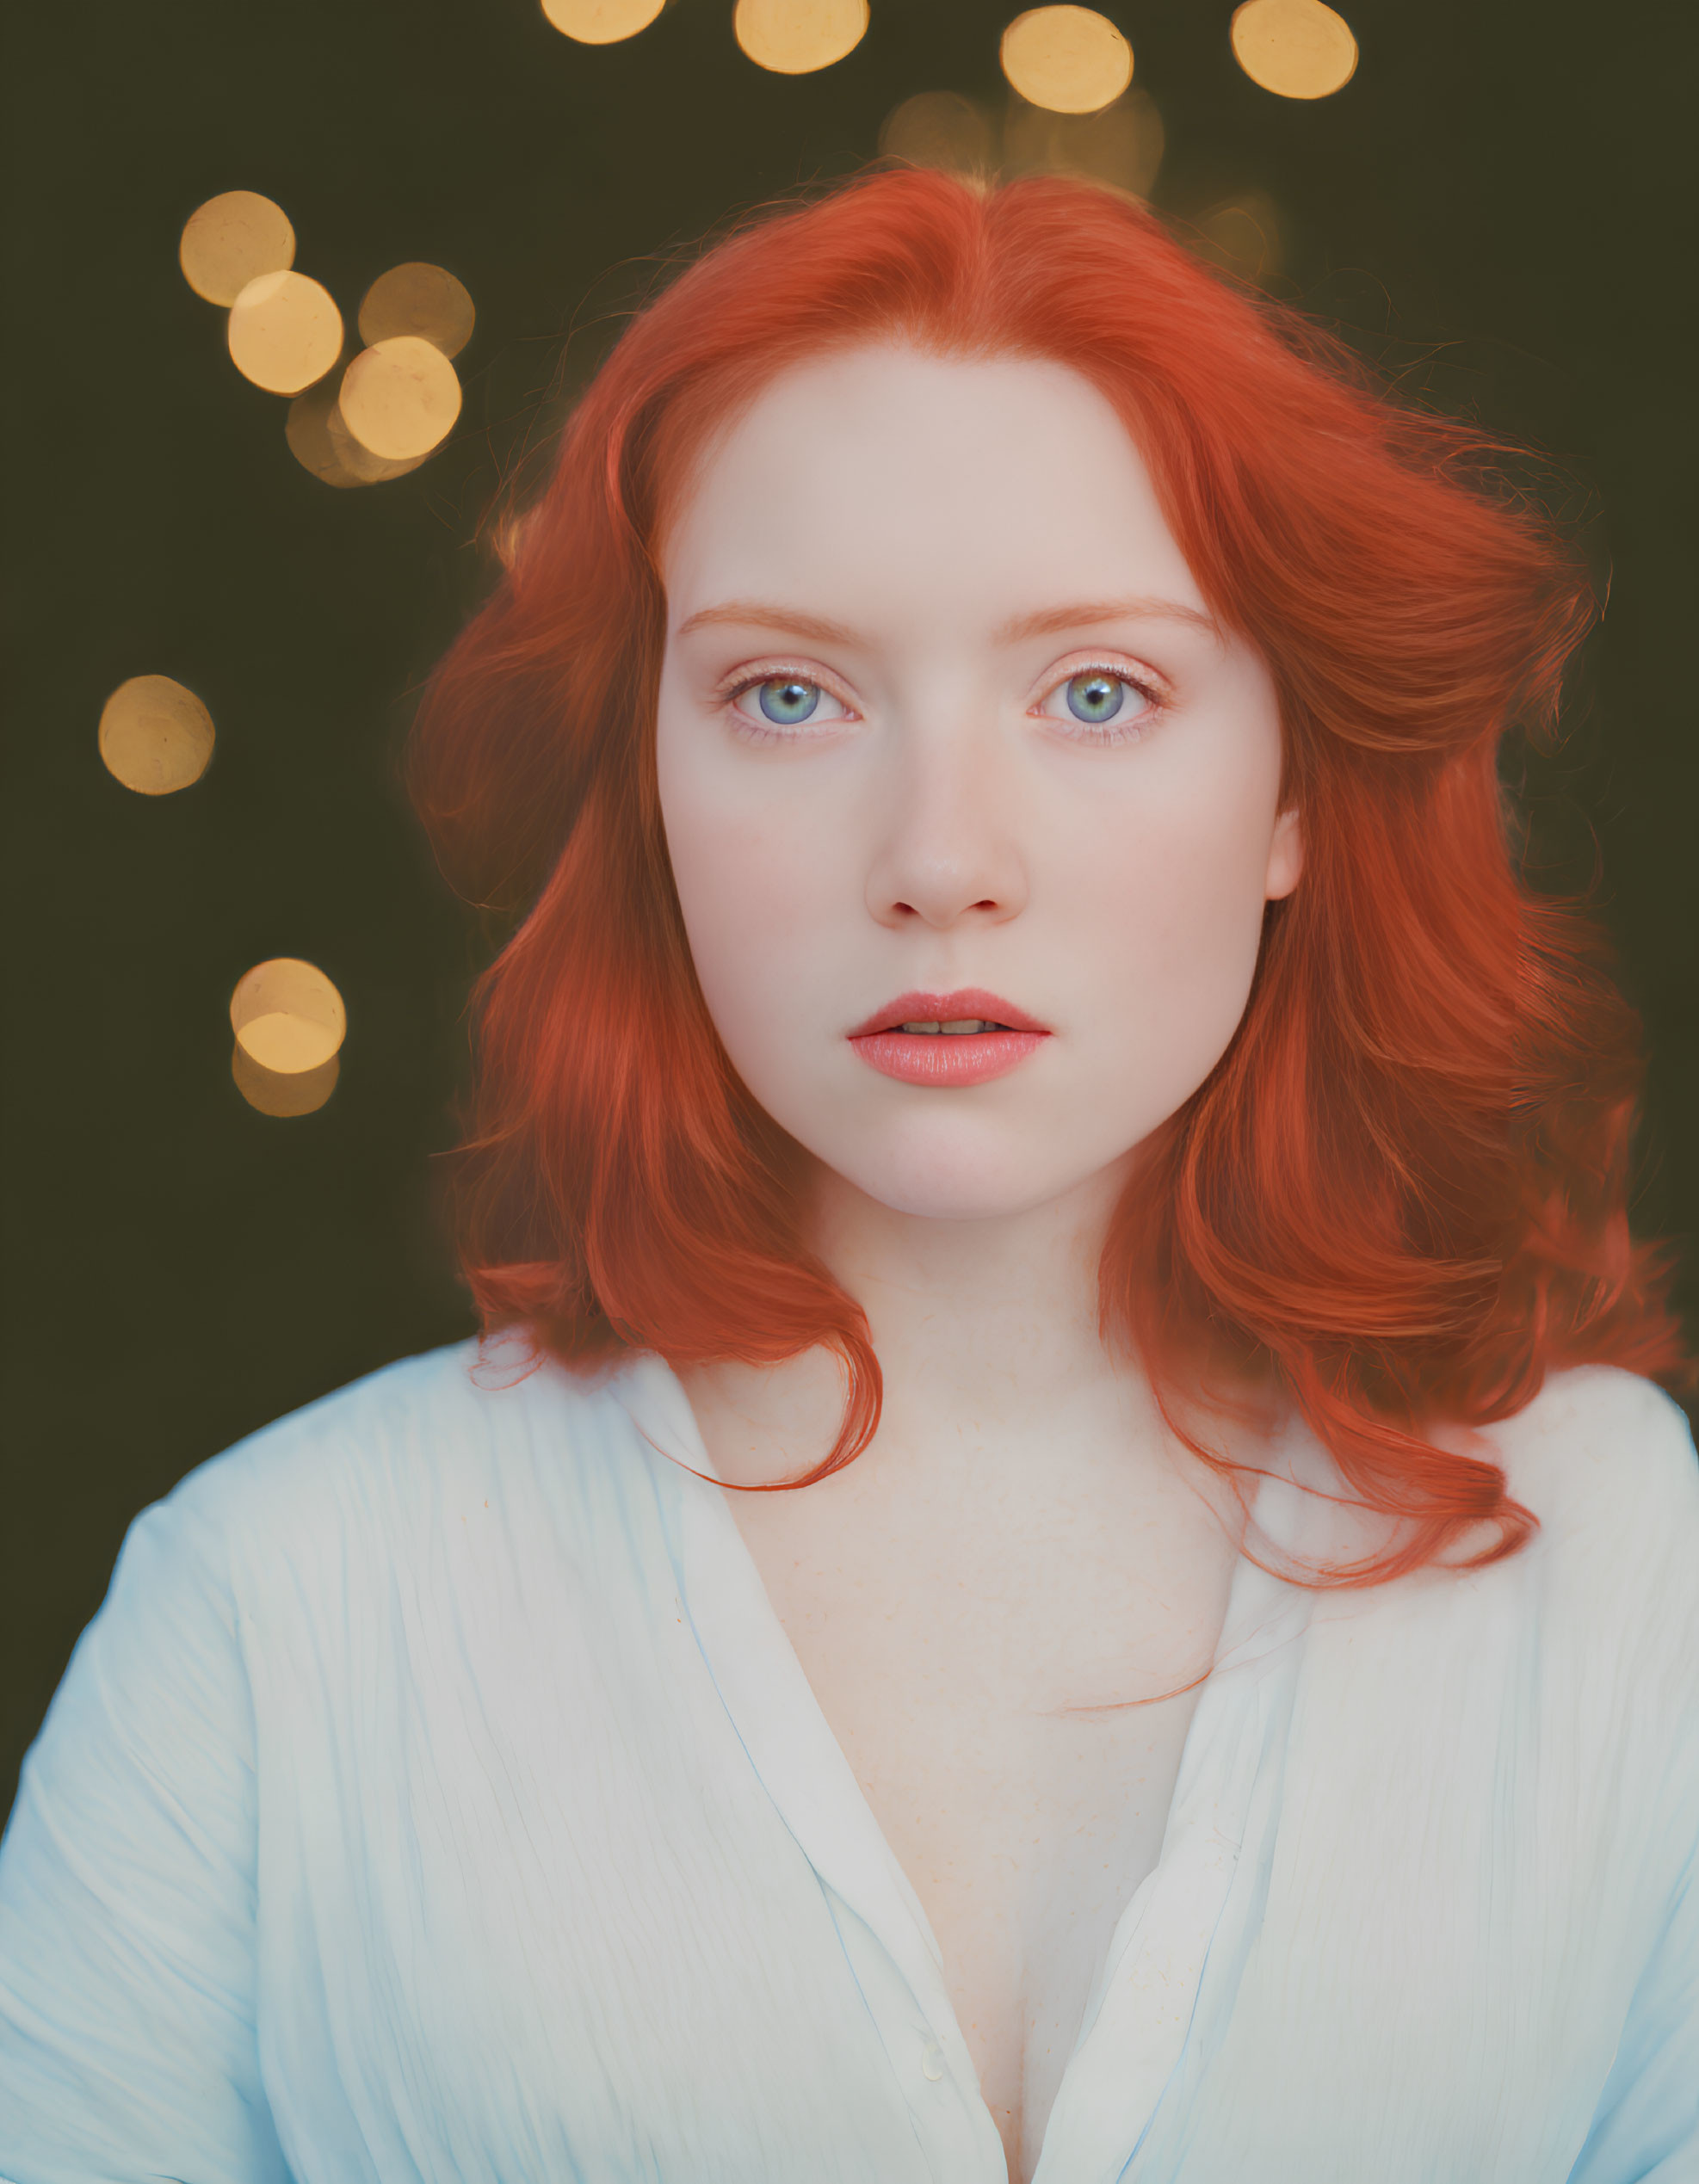 Vibrant red-haired woman in white blouse on dark background with golden bokeh lights